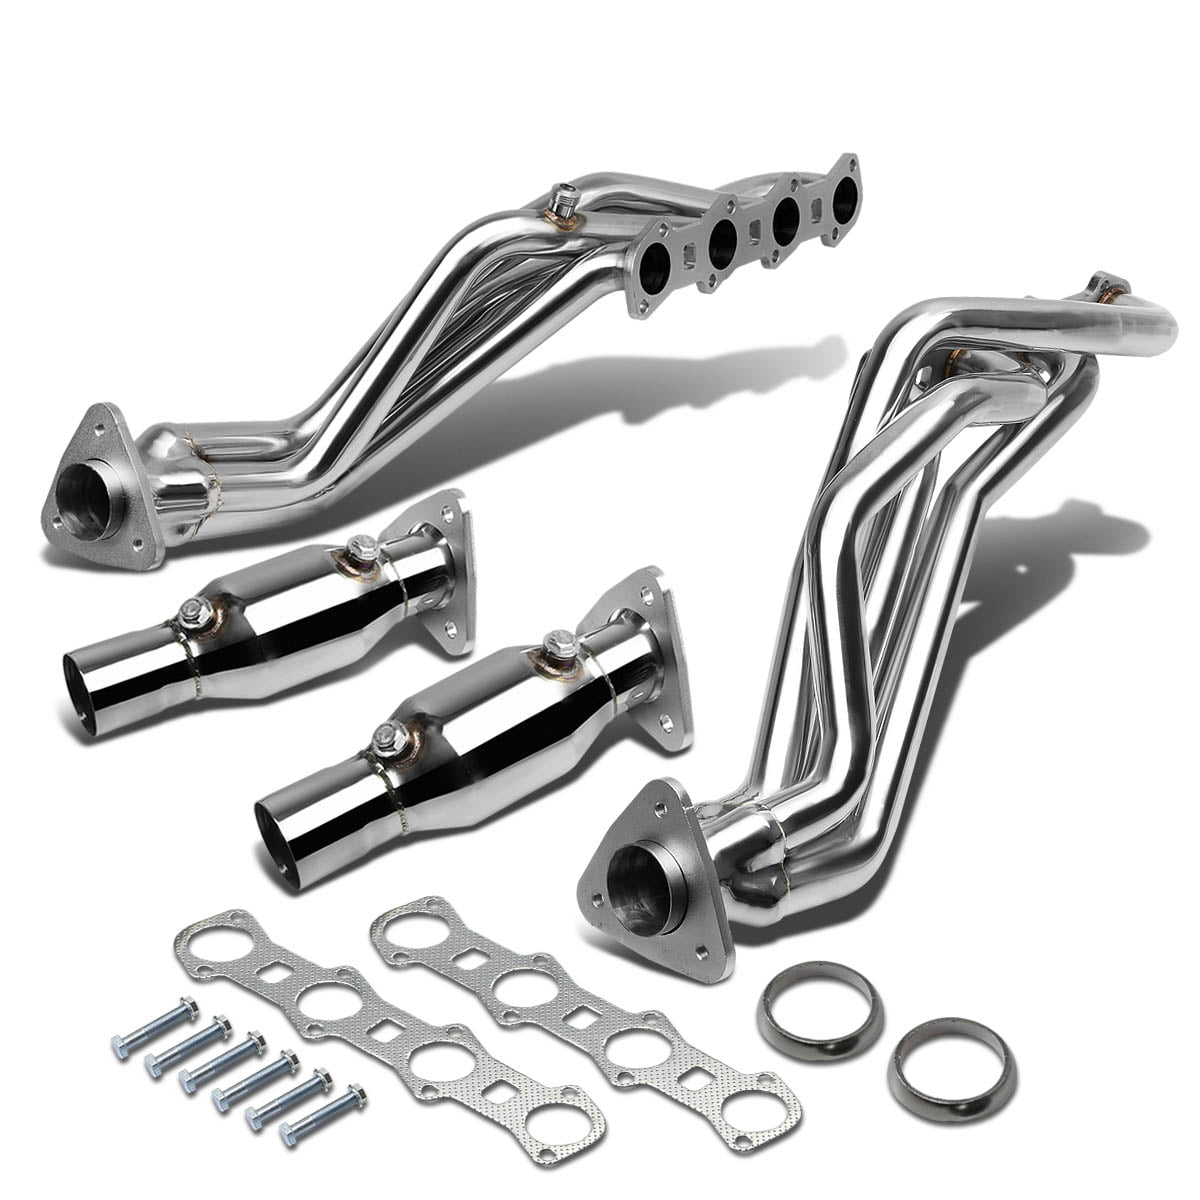 DNA Motoring HDS-F150-99-54L-LONG Stainless Steel Exhaust Header Manifold 